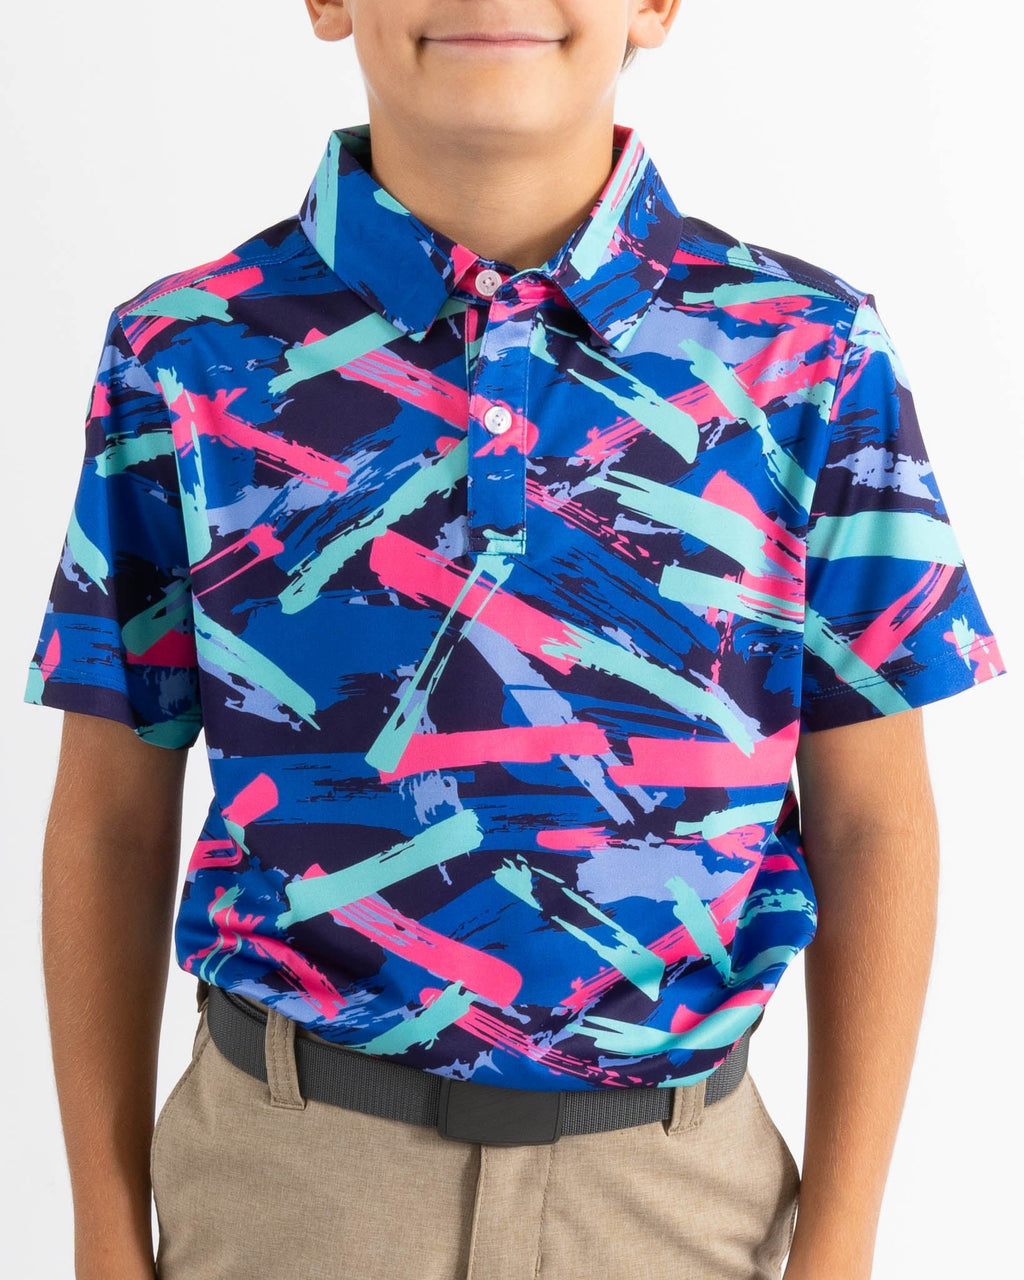 Space Golf Polo Shirt - Space Man. Seriously Great Polos. Only $39.95. –  Yatta Golf